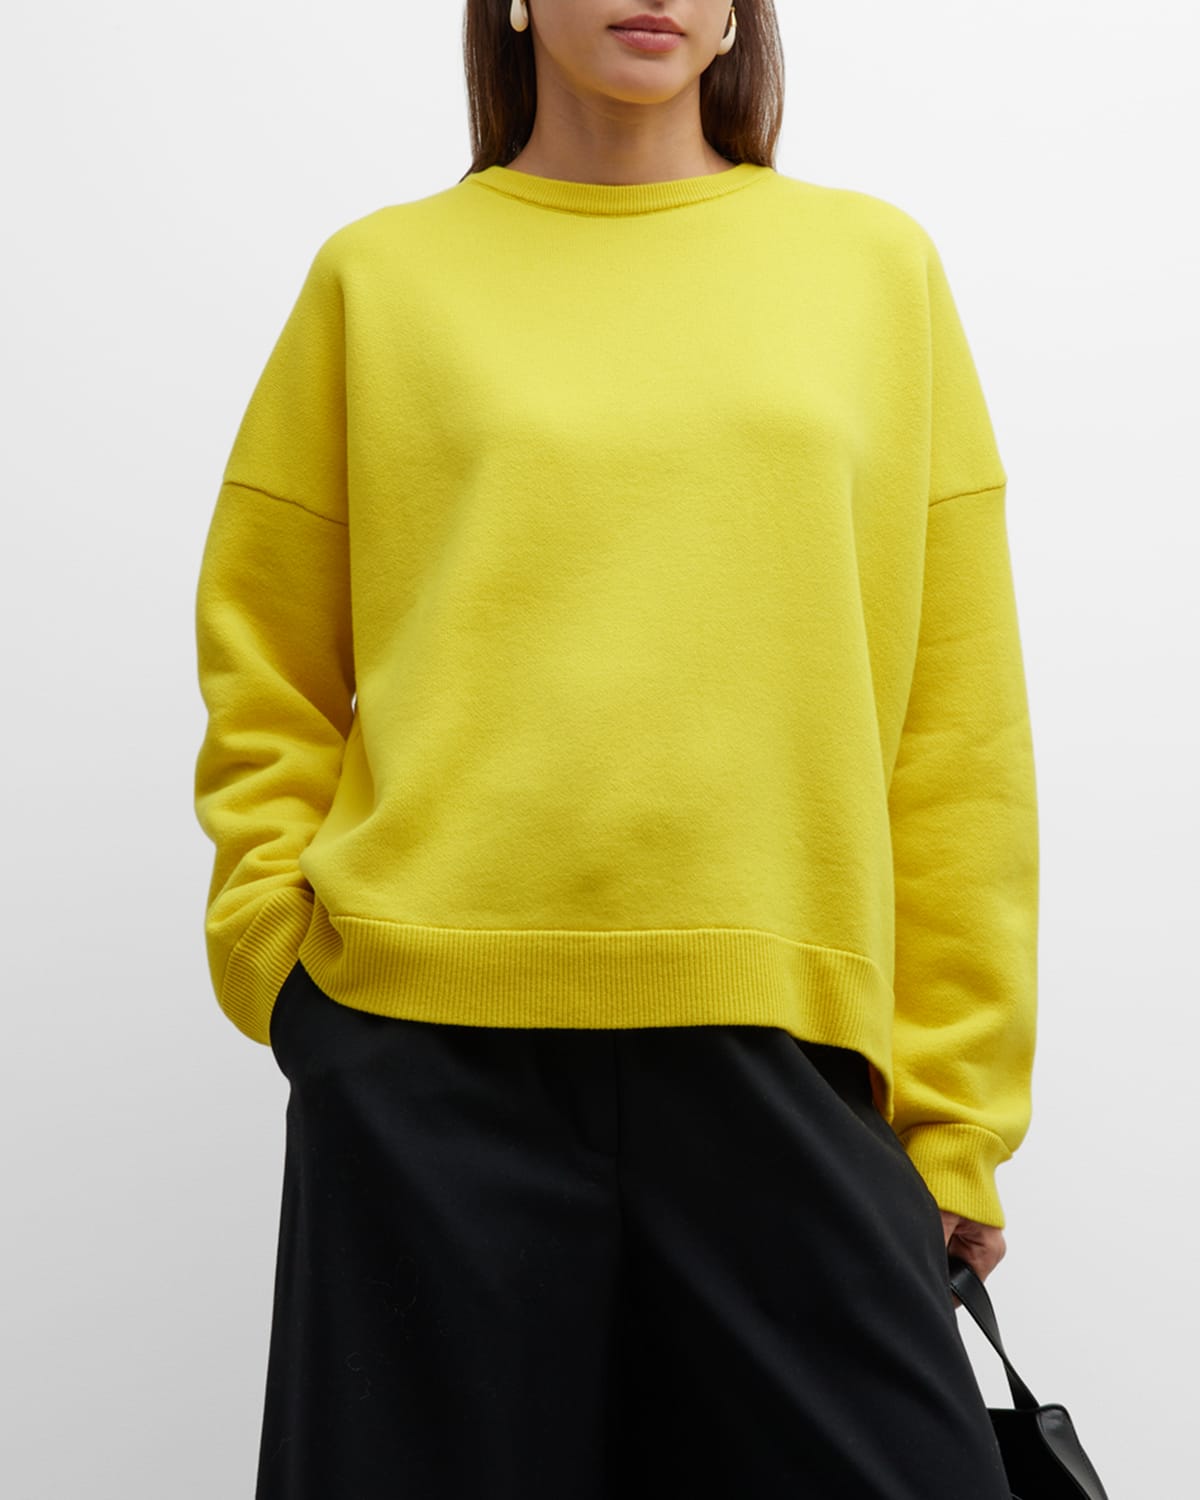 Loewe Sparkle Knit Sweater In Yellow